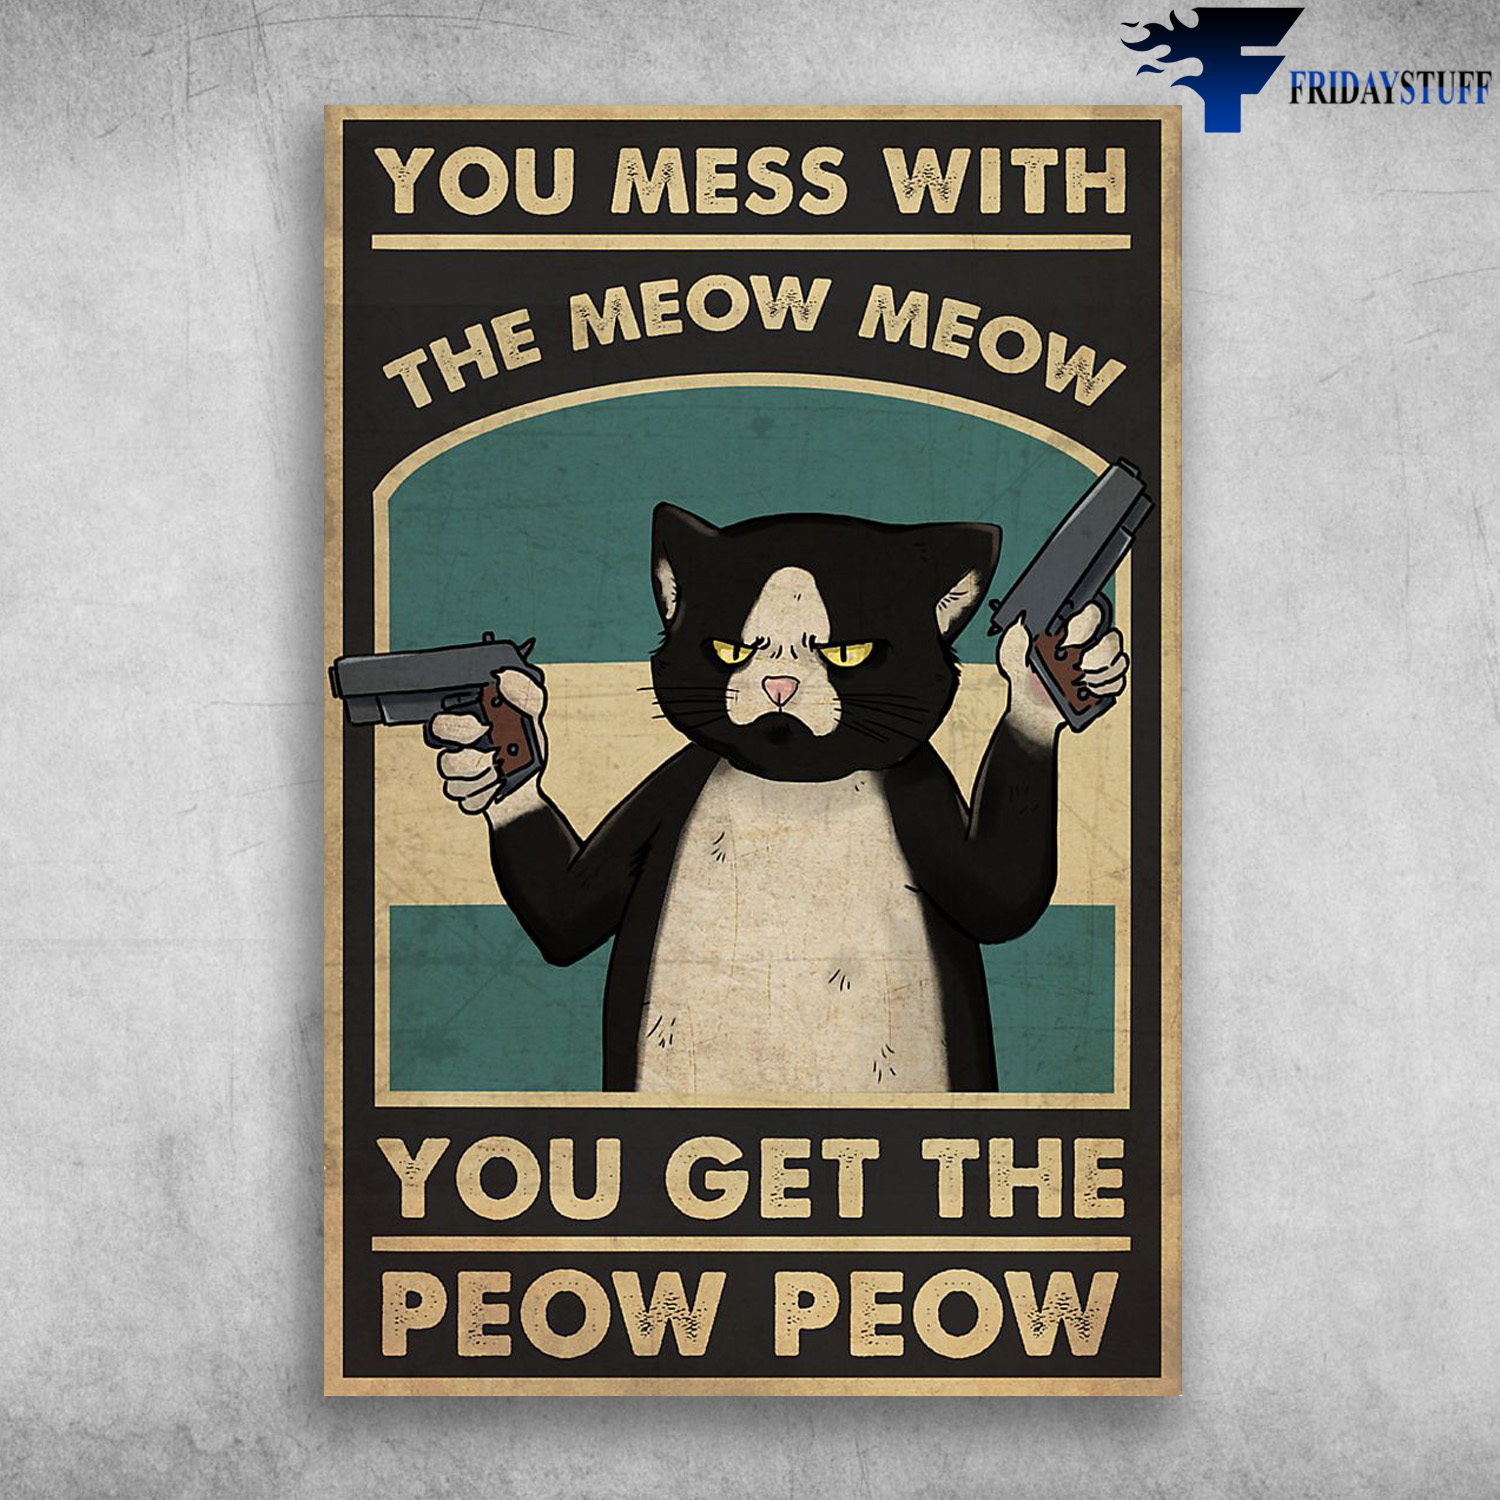 Black Cat And Gun - You Mess With The Mew Mew, You Get The Peow Peow